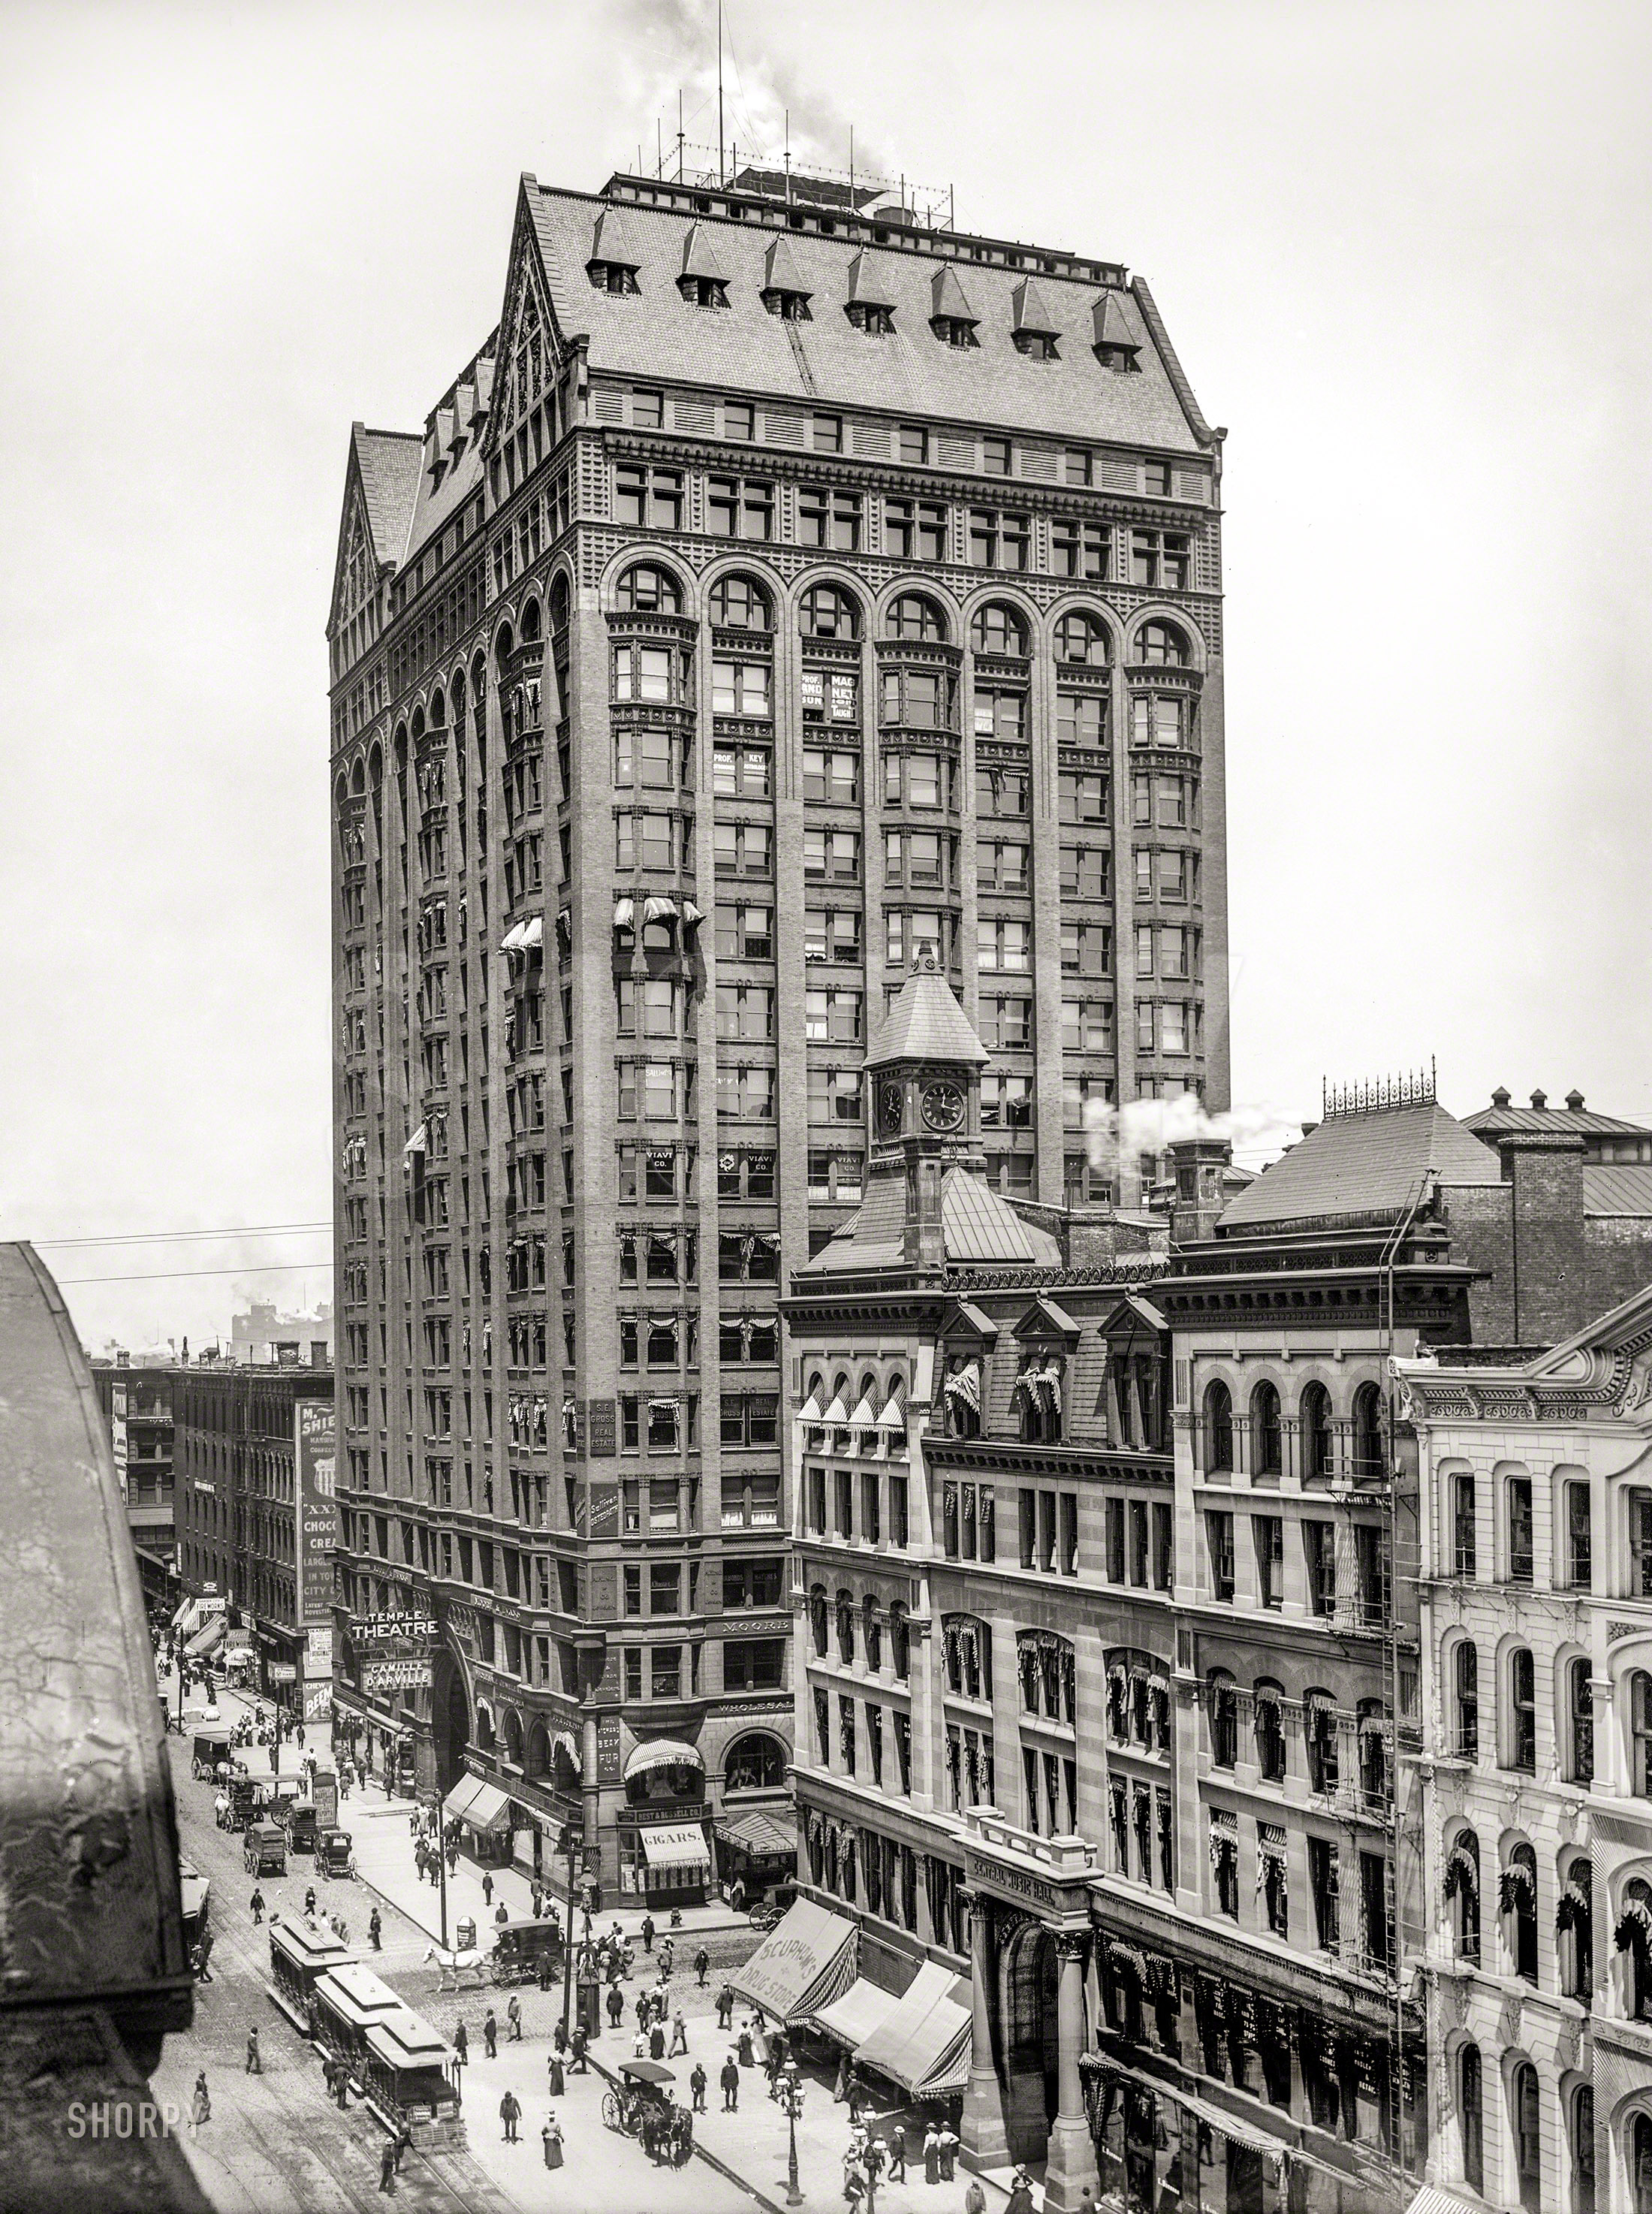 September 11, 1900. "Masonic Temple, State Street, Chicago -- Temple Theatre and Central Music Hall." Completed 1892; demolished 1939. Shortly after this photo was taken, Central Music Hall met the wrecking ball to make way for the Marshall Field department store. 8x10 glass negative. View full size.